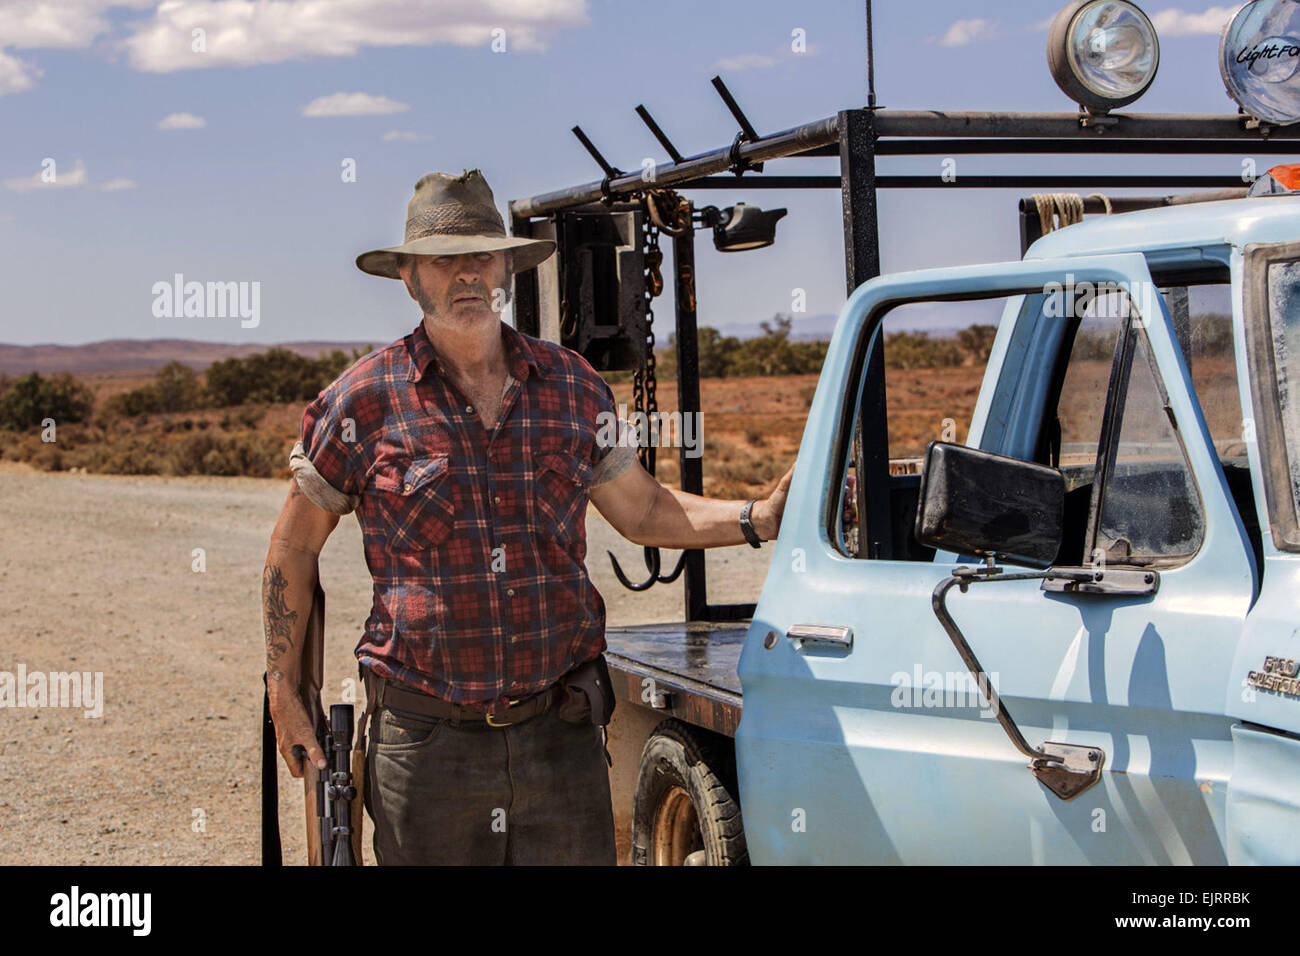 Wolf Creek 2 is a 2013 Australian horror film co-written and directed by Greg McLean.The film serves as a sequel to his 2005 film Wolf Creek and features John Jarratt reprising his role as Mick Taylor. It was released on 30 August 2013 at the Venice Film Festival, then released in Australia on 20 February 2014. Stock Photo